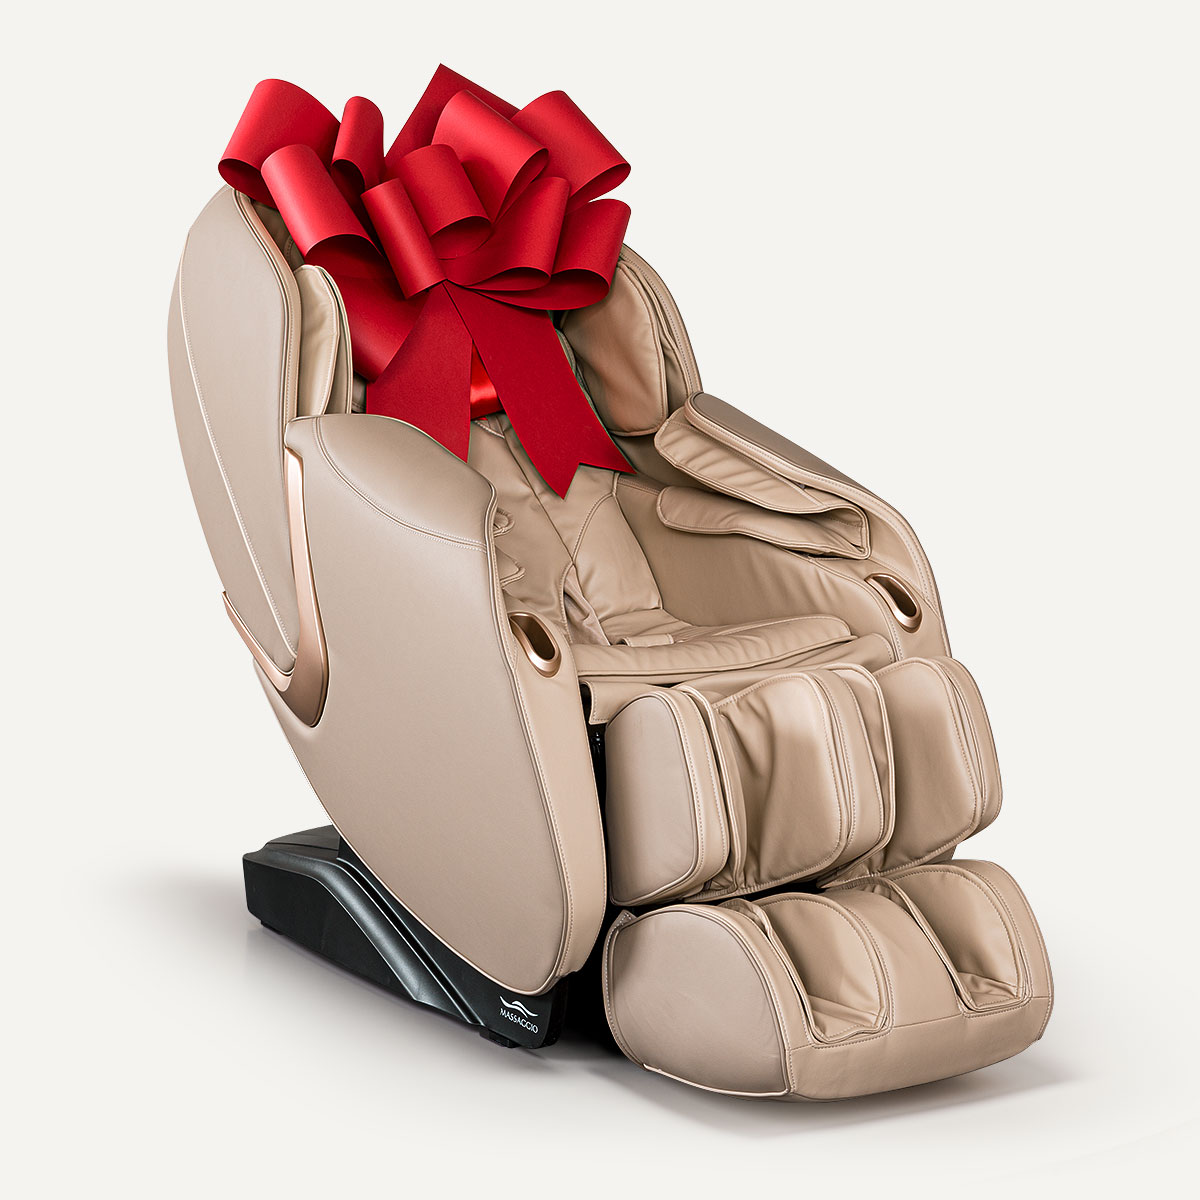 Gift bow for massage chair Rest Lords